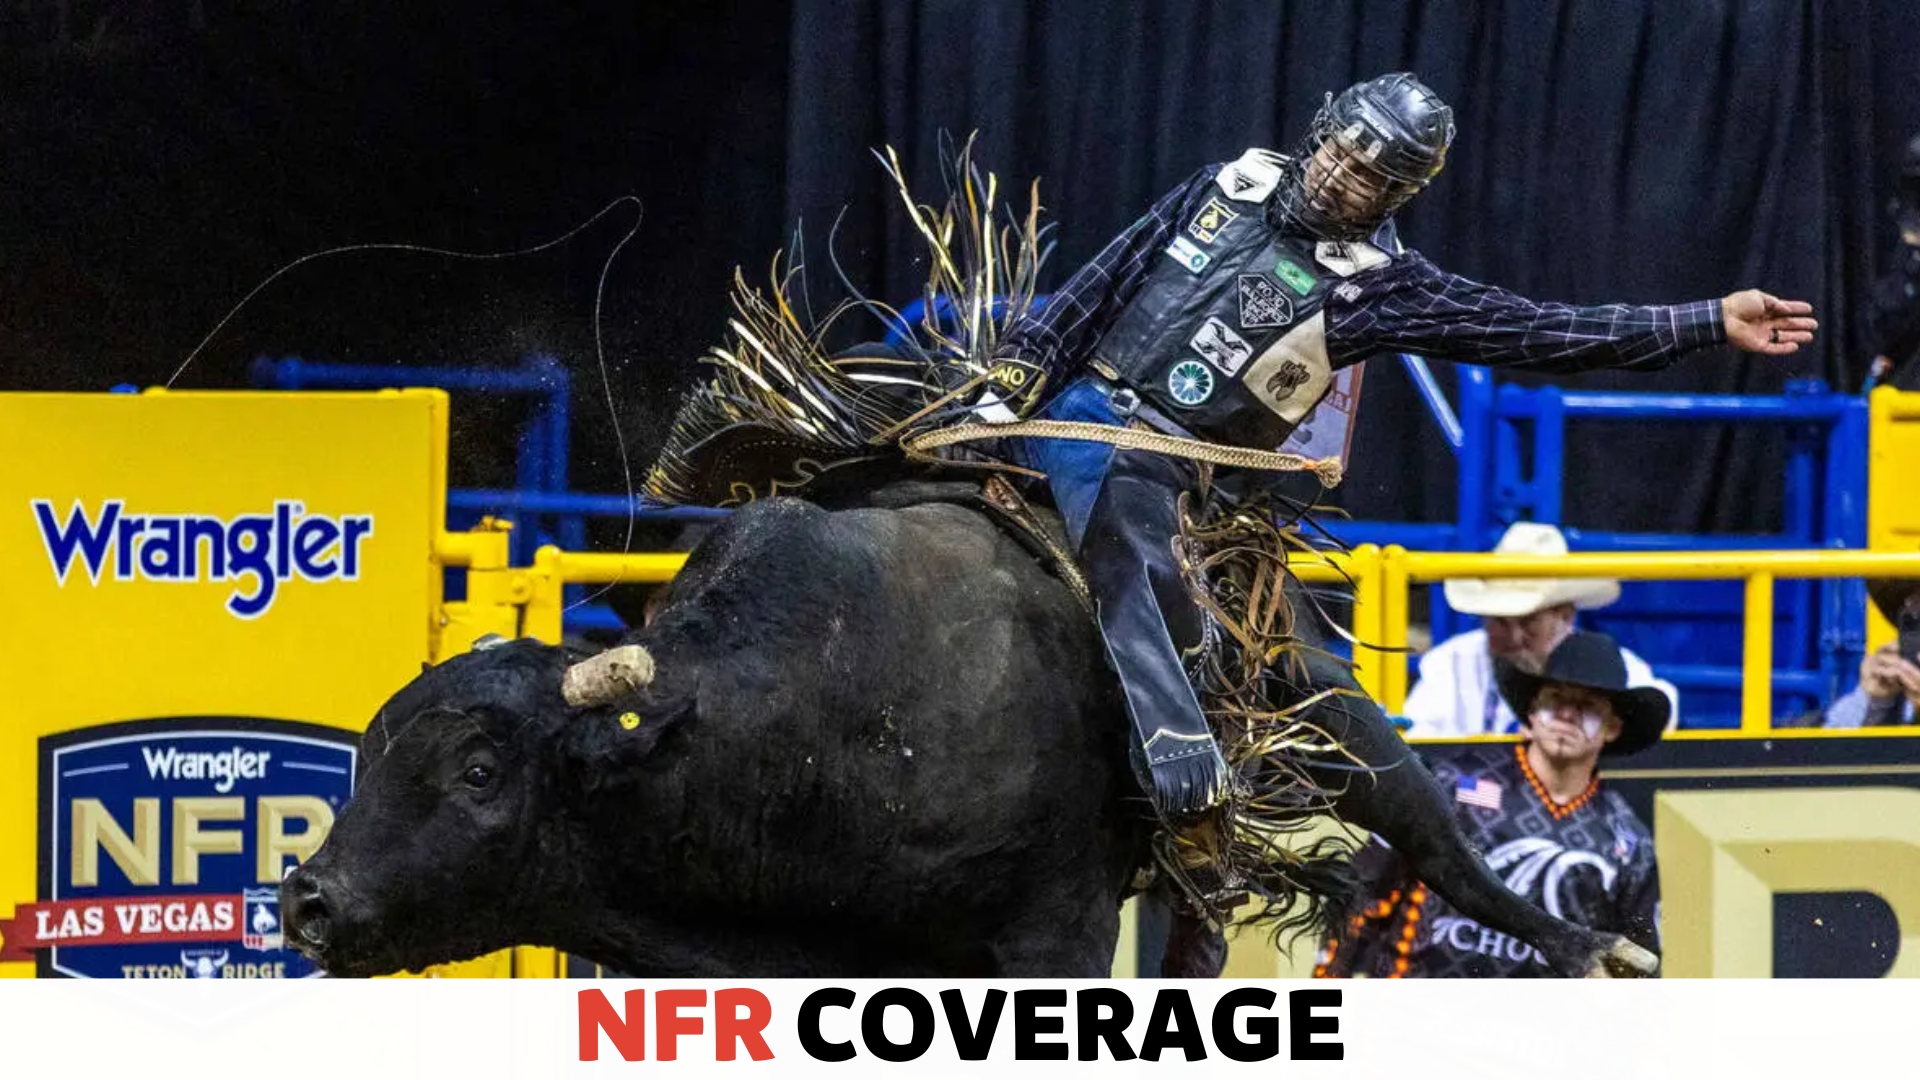 Nfr Bull Riding : The Thrilling Power of Rodeo